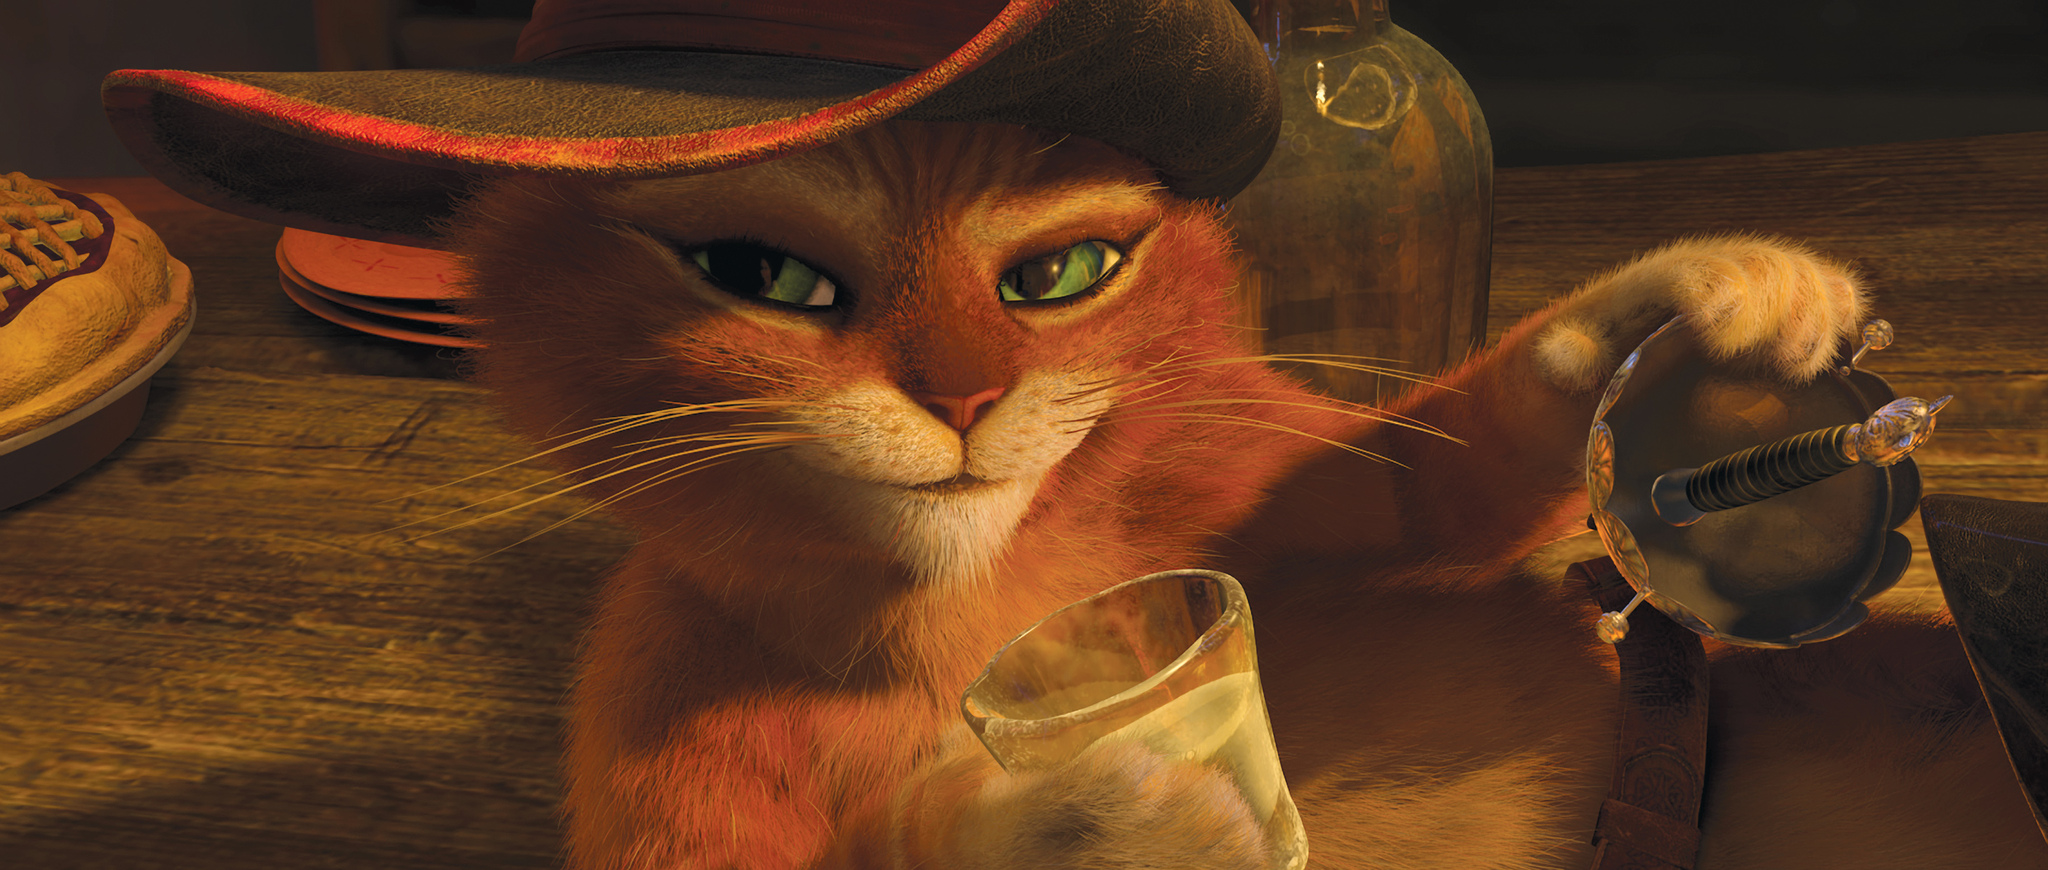 Puss in Boots: 8 Similar Animated Movies You Must Watch Next